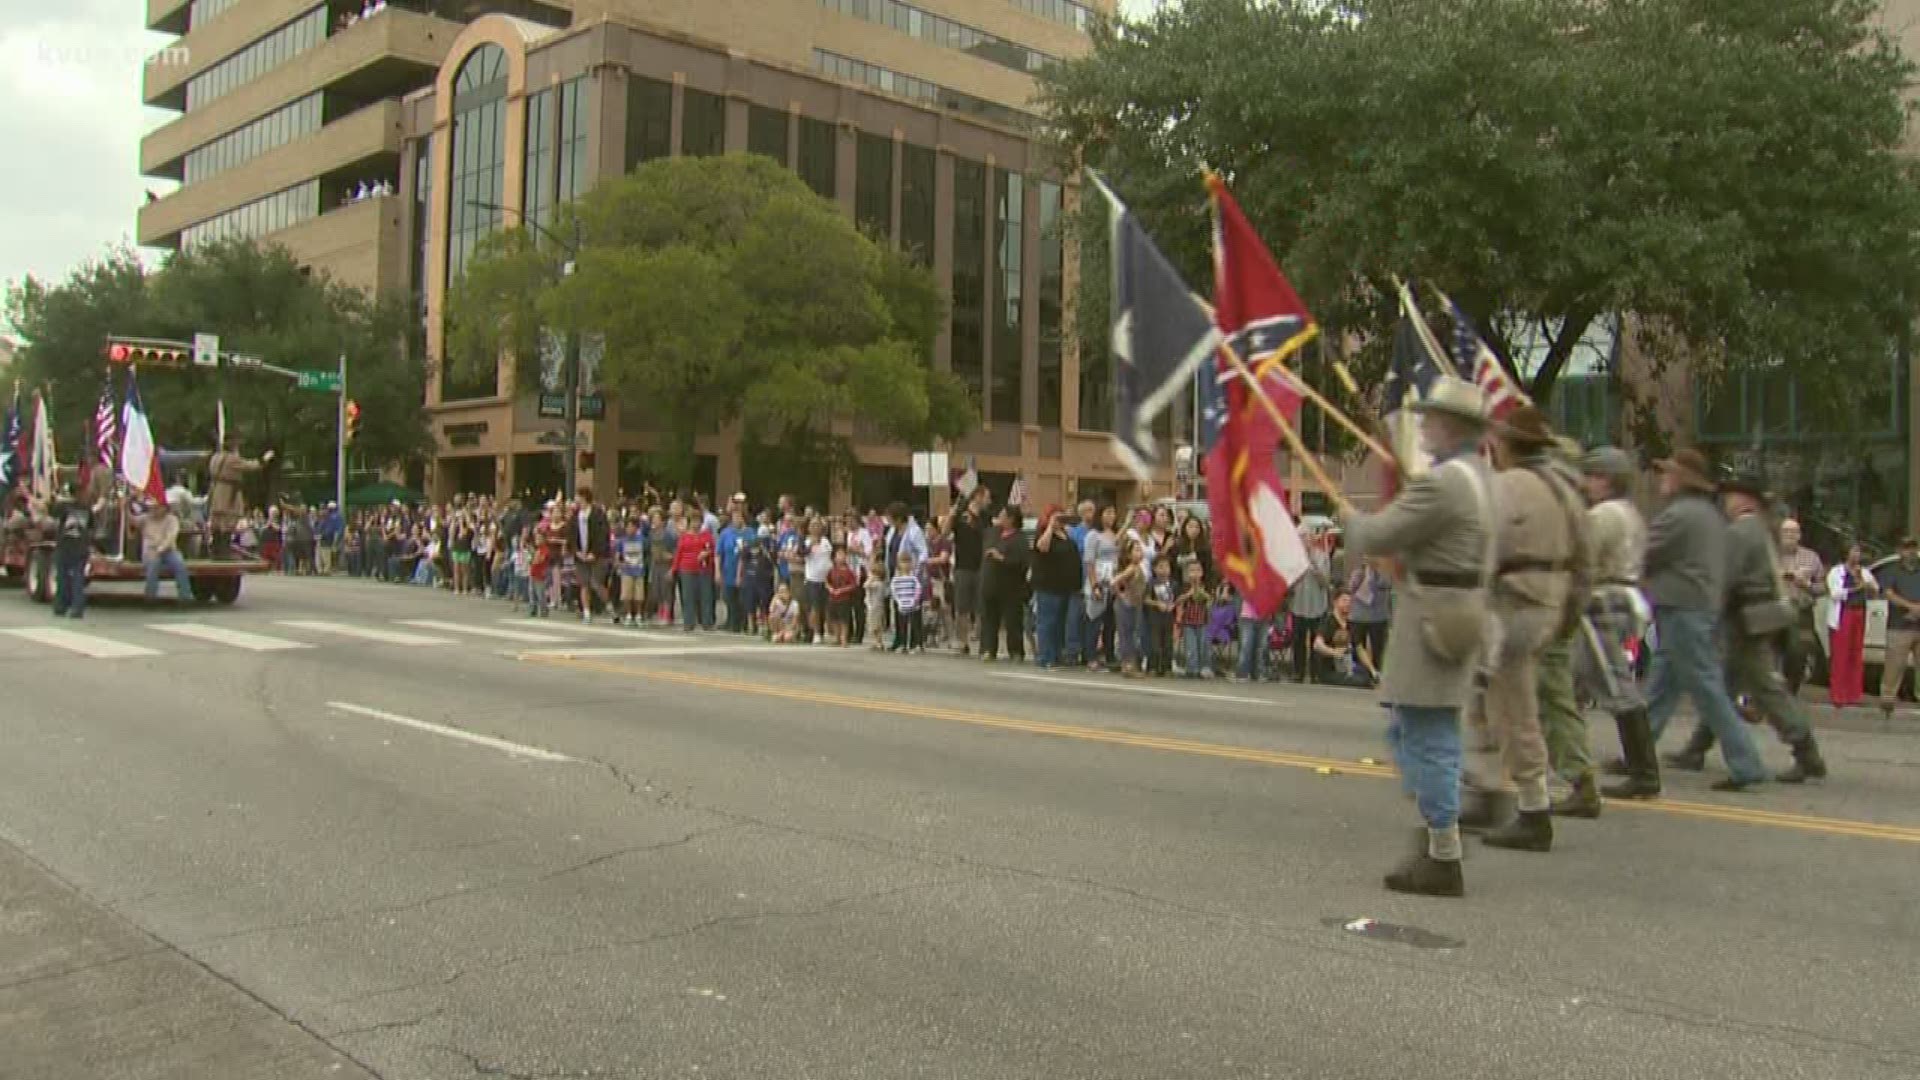 It's day two of continued controversy around Mayor Steve Adler's decision not to march in tomorrow's Veterans Day Parade. Williamson County Sheriff Robert Chody is one of many criticizing the mayor on Social media.